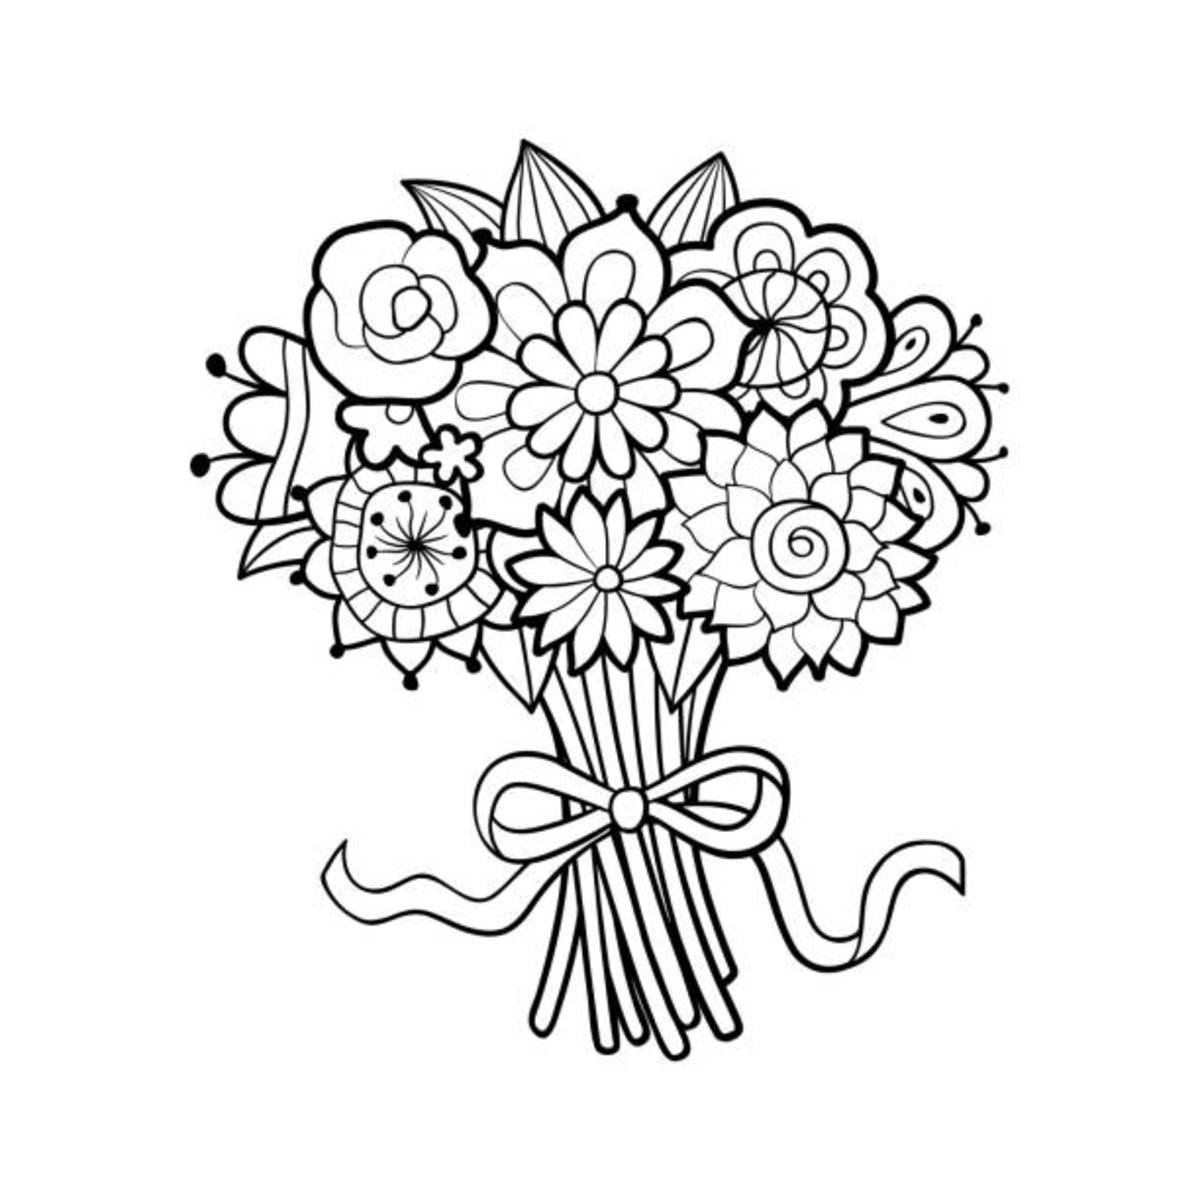 25 Free Printable Flower Coloring Pages - Parade: Entertainment, Recipes,  Health, Life, Holidays